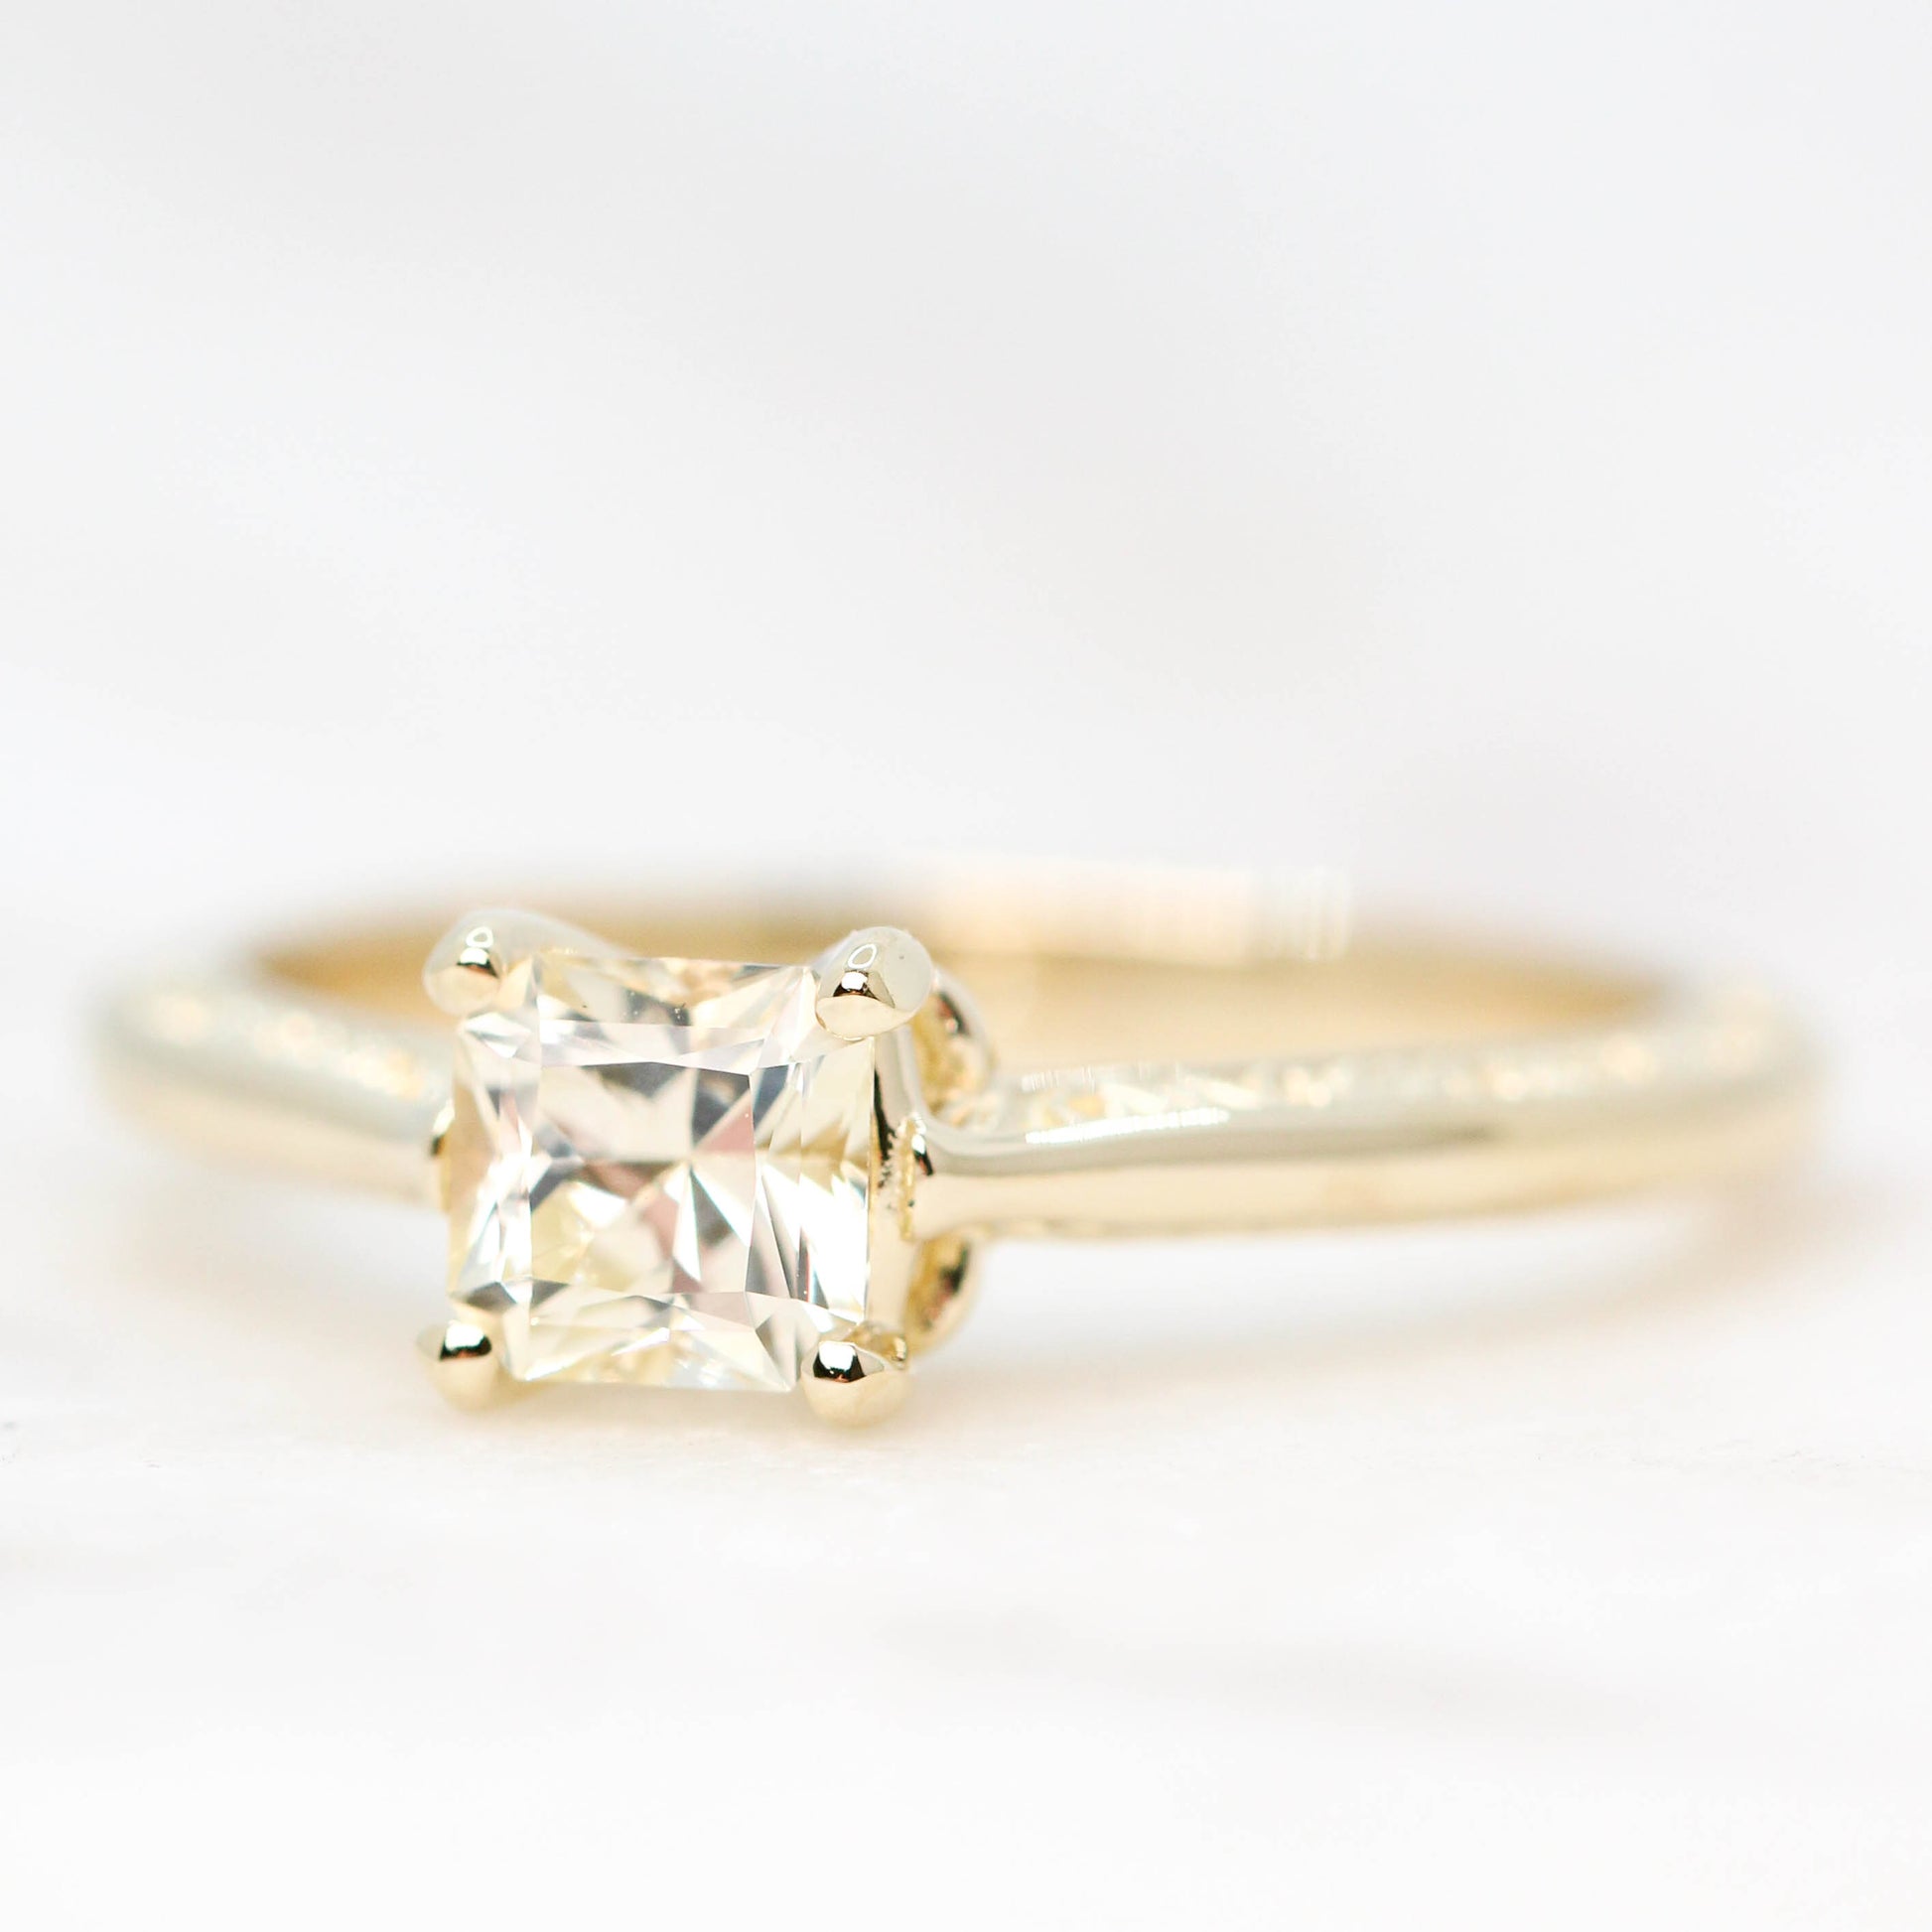 Vivienne Ring with a 0.77 Carat Radiant Cut Champagne Sapphire in 14k Yellow Gold - Ready to Size and Ship - Midwinter Co. Alternative Bridal Rings and Modern Fine Jewelry